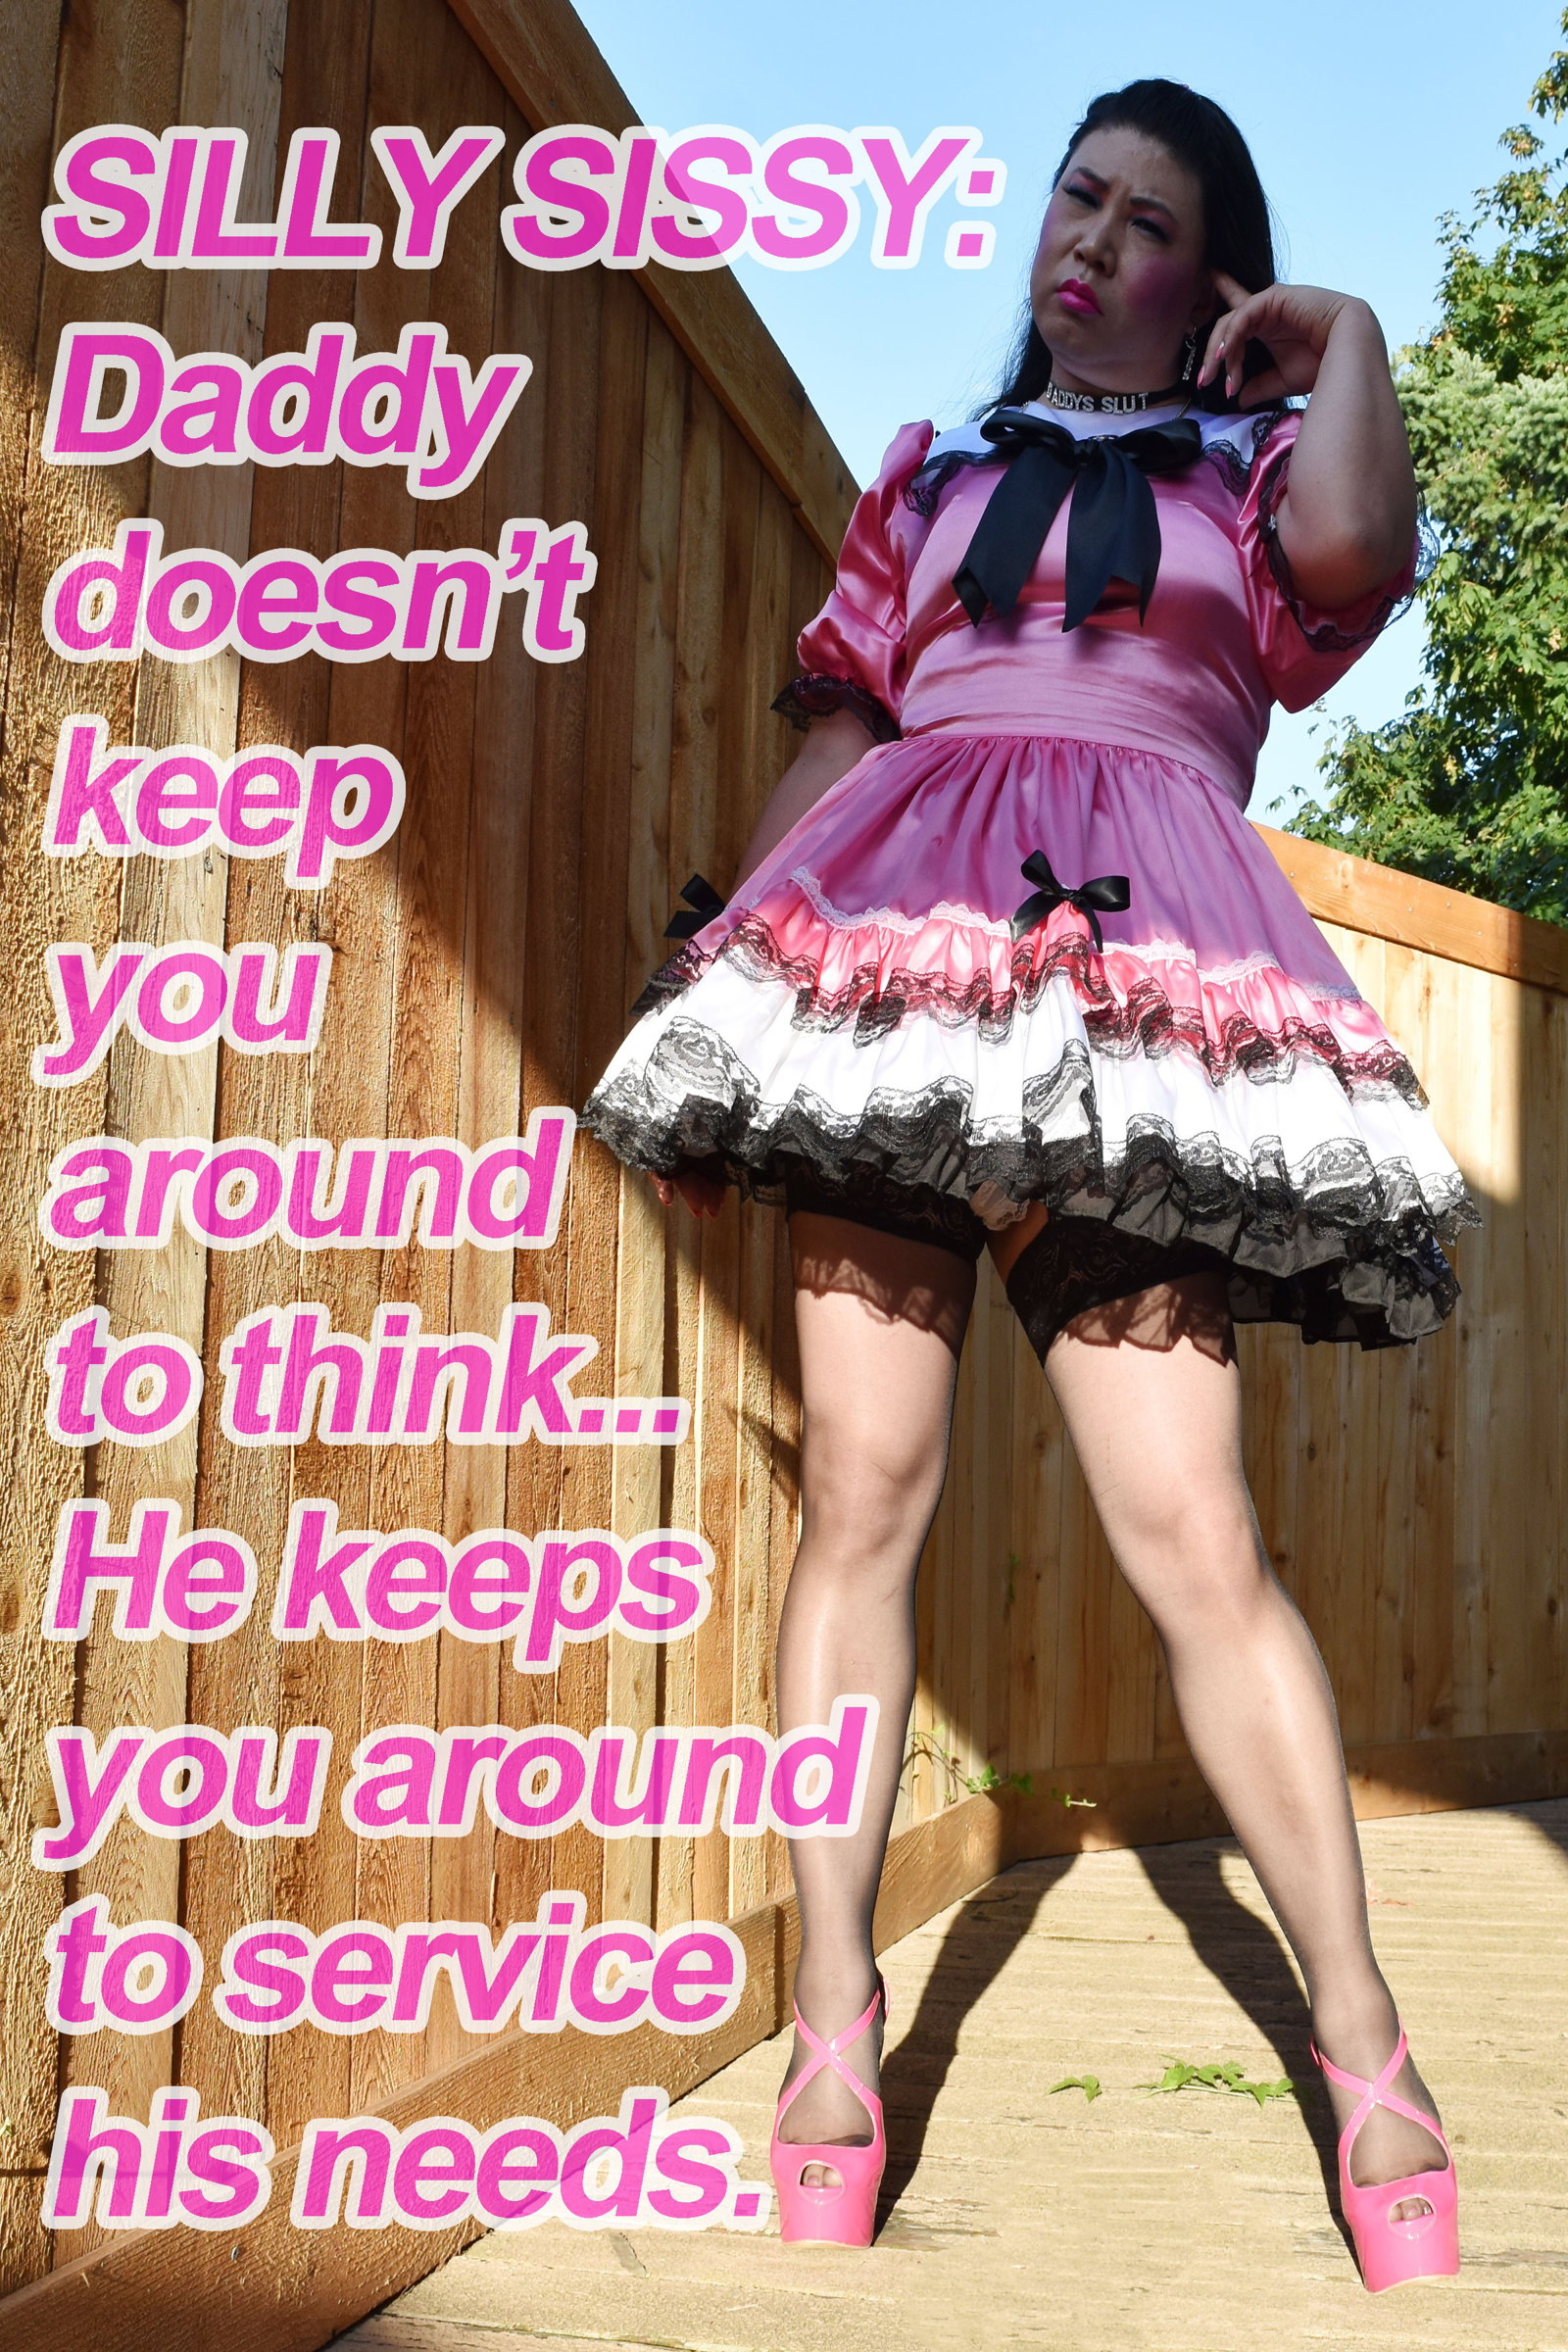 Watch the Photo by krissy4u with the username @krissy4u, who is a star user, posted on August 12, 2019. The post is about the topic Krissy4u. and the text says 'A Silly Little Caption Pic For Krissy4u Fans :) #krissy4u #tgirl #sissy #captions'